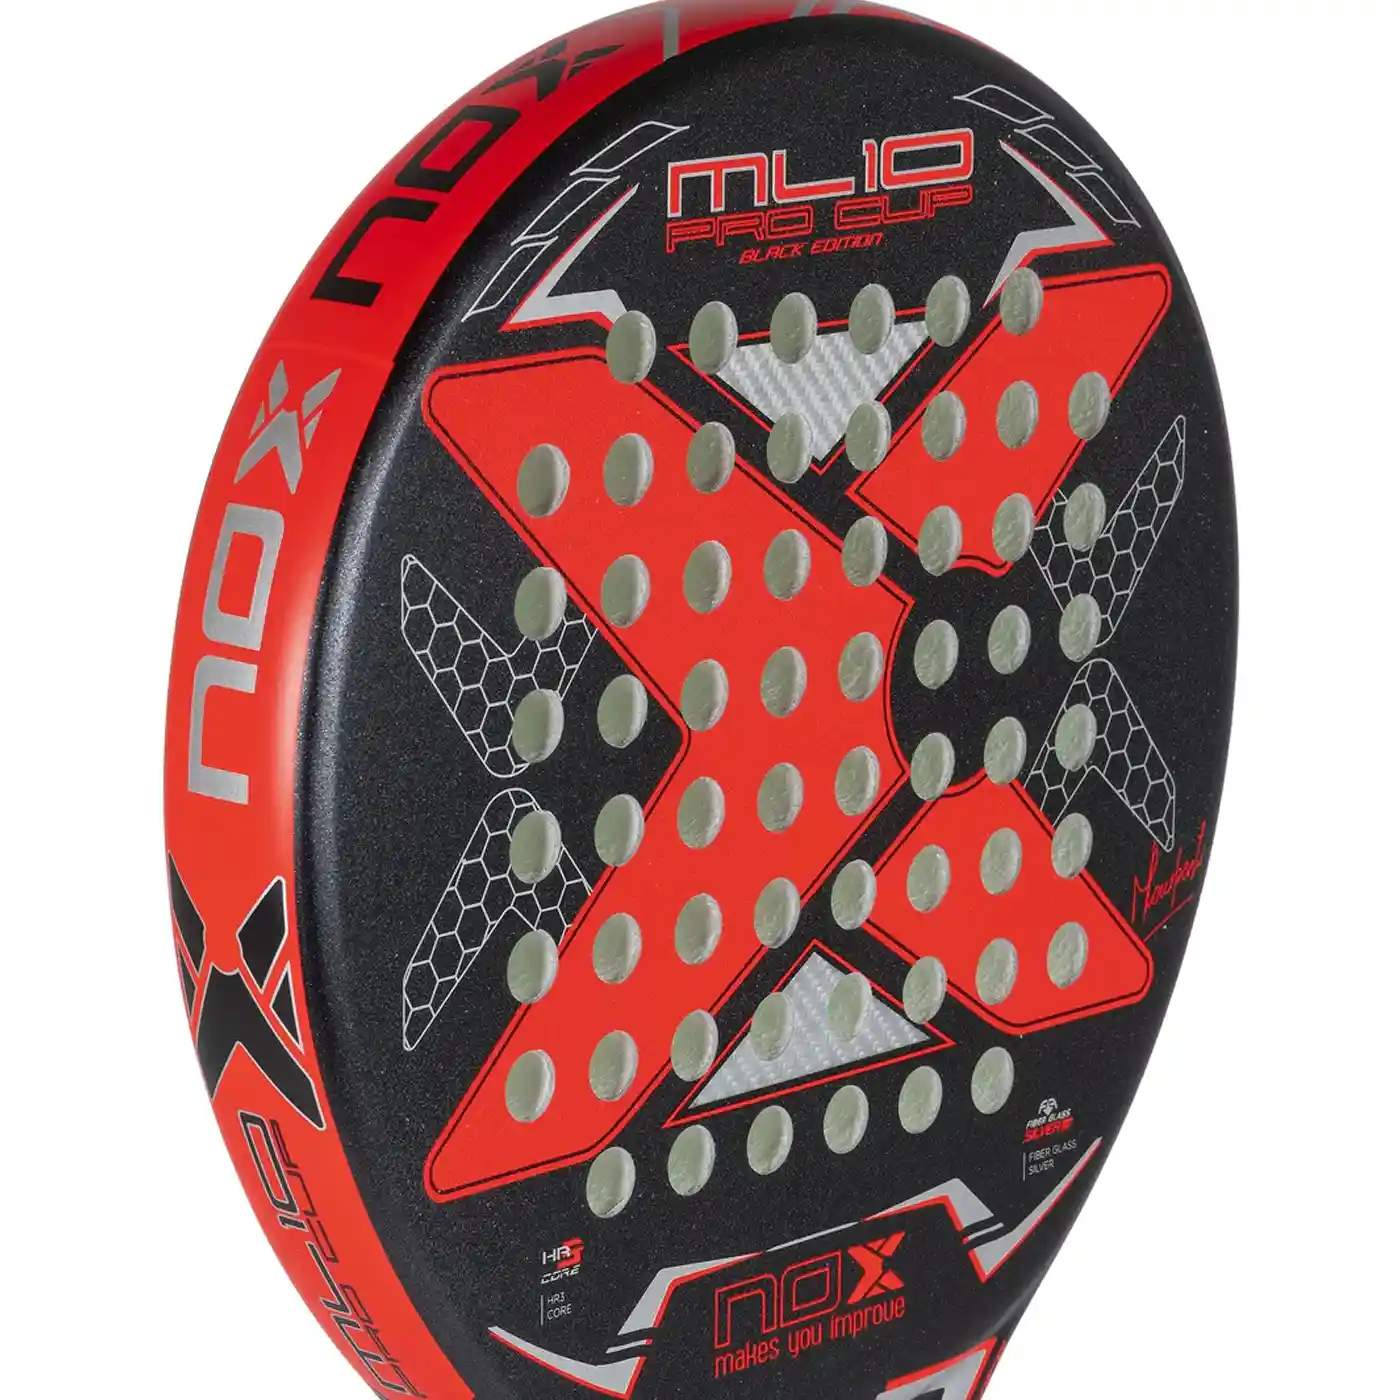 NOX ML10 PRO CUP BLACK EDITION ARENA Padel Racket 2023 racket with cover bag Image 5